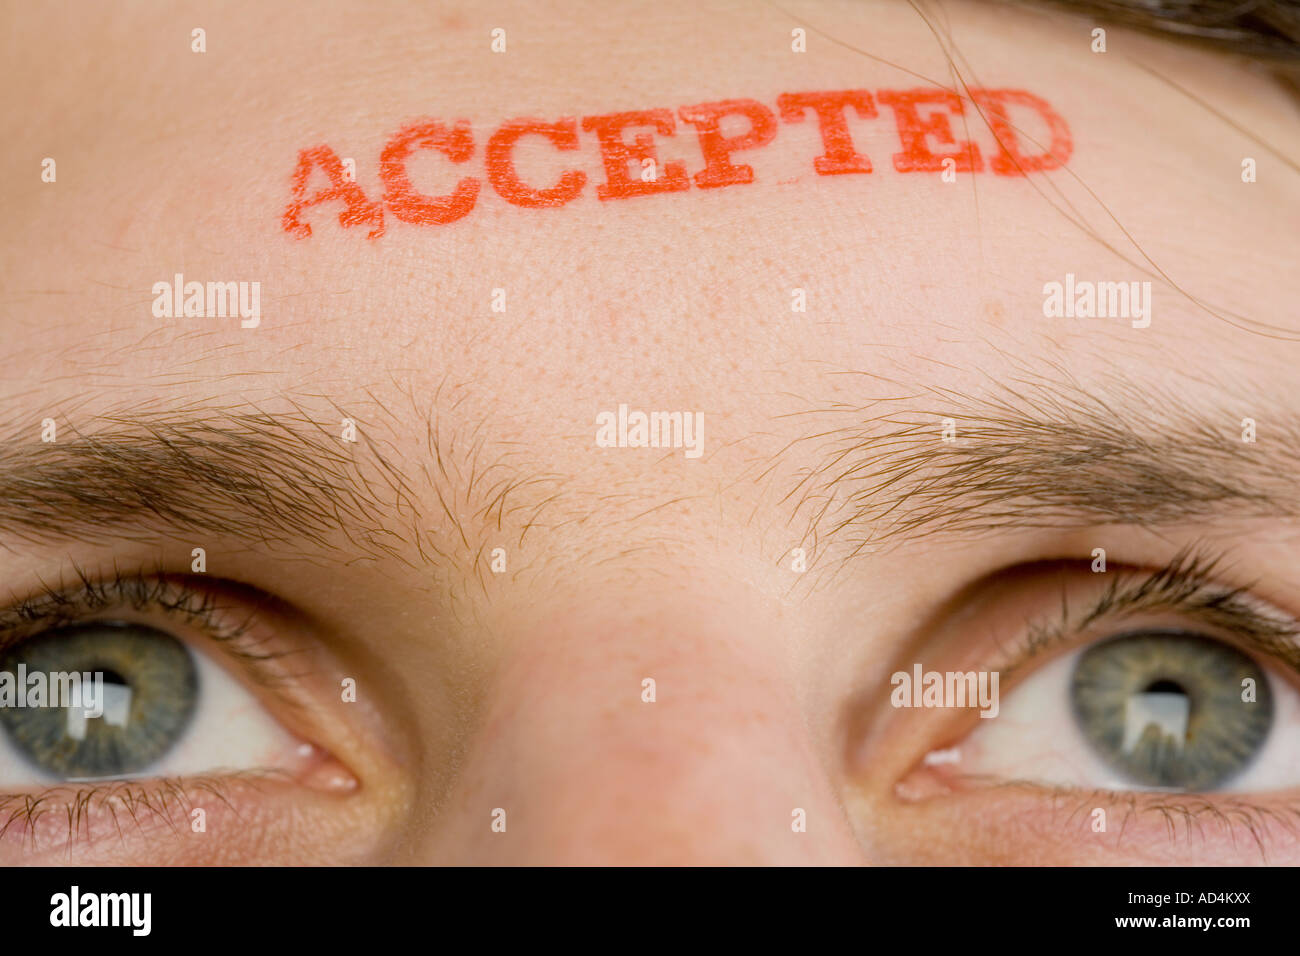 A man with 'Accepted' stamped on his forehead Stock Photo